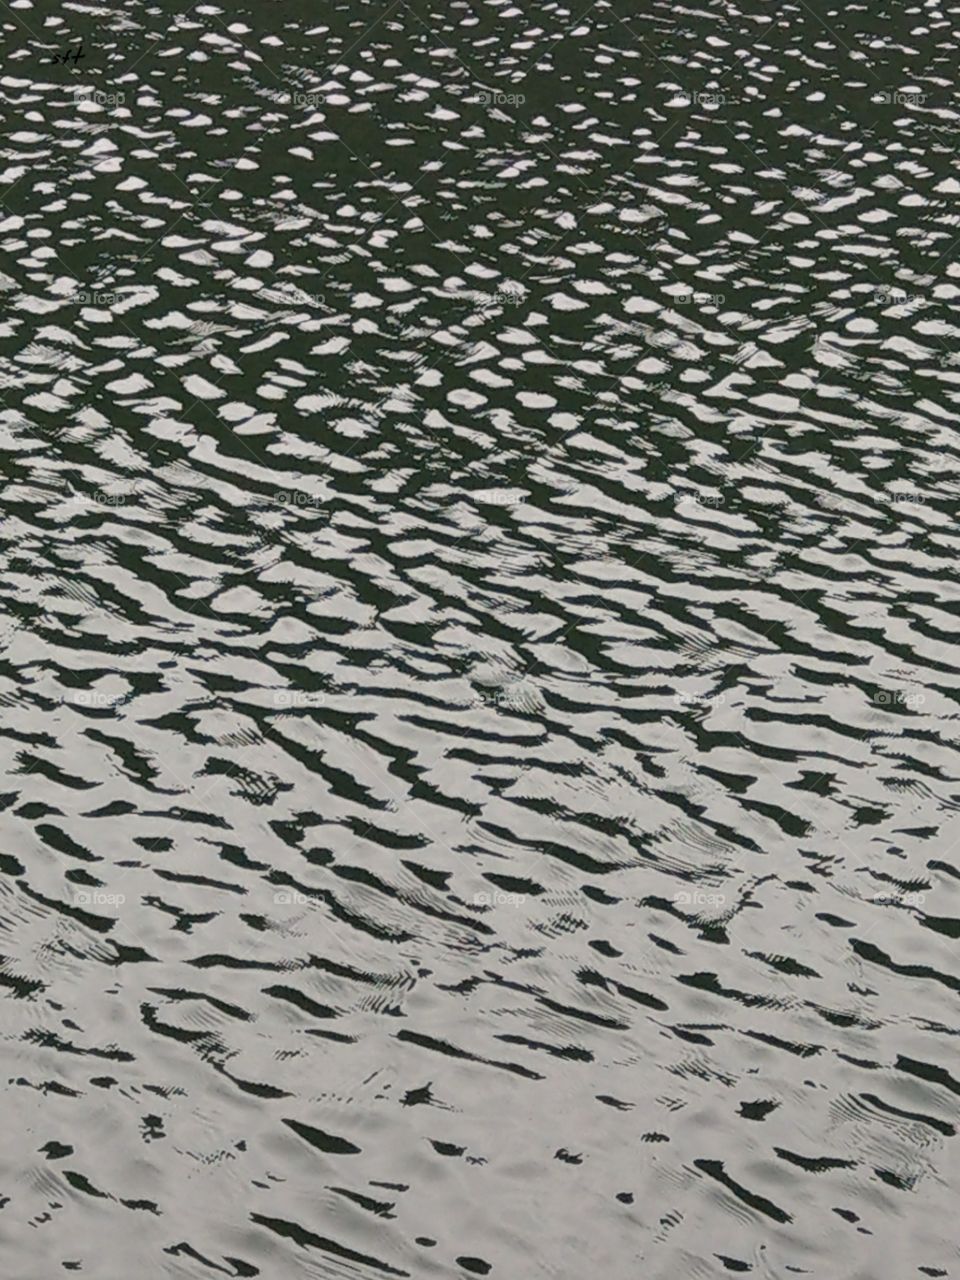 The water pattern for lake, a natural beauty looks calm, peaceful and neat.